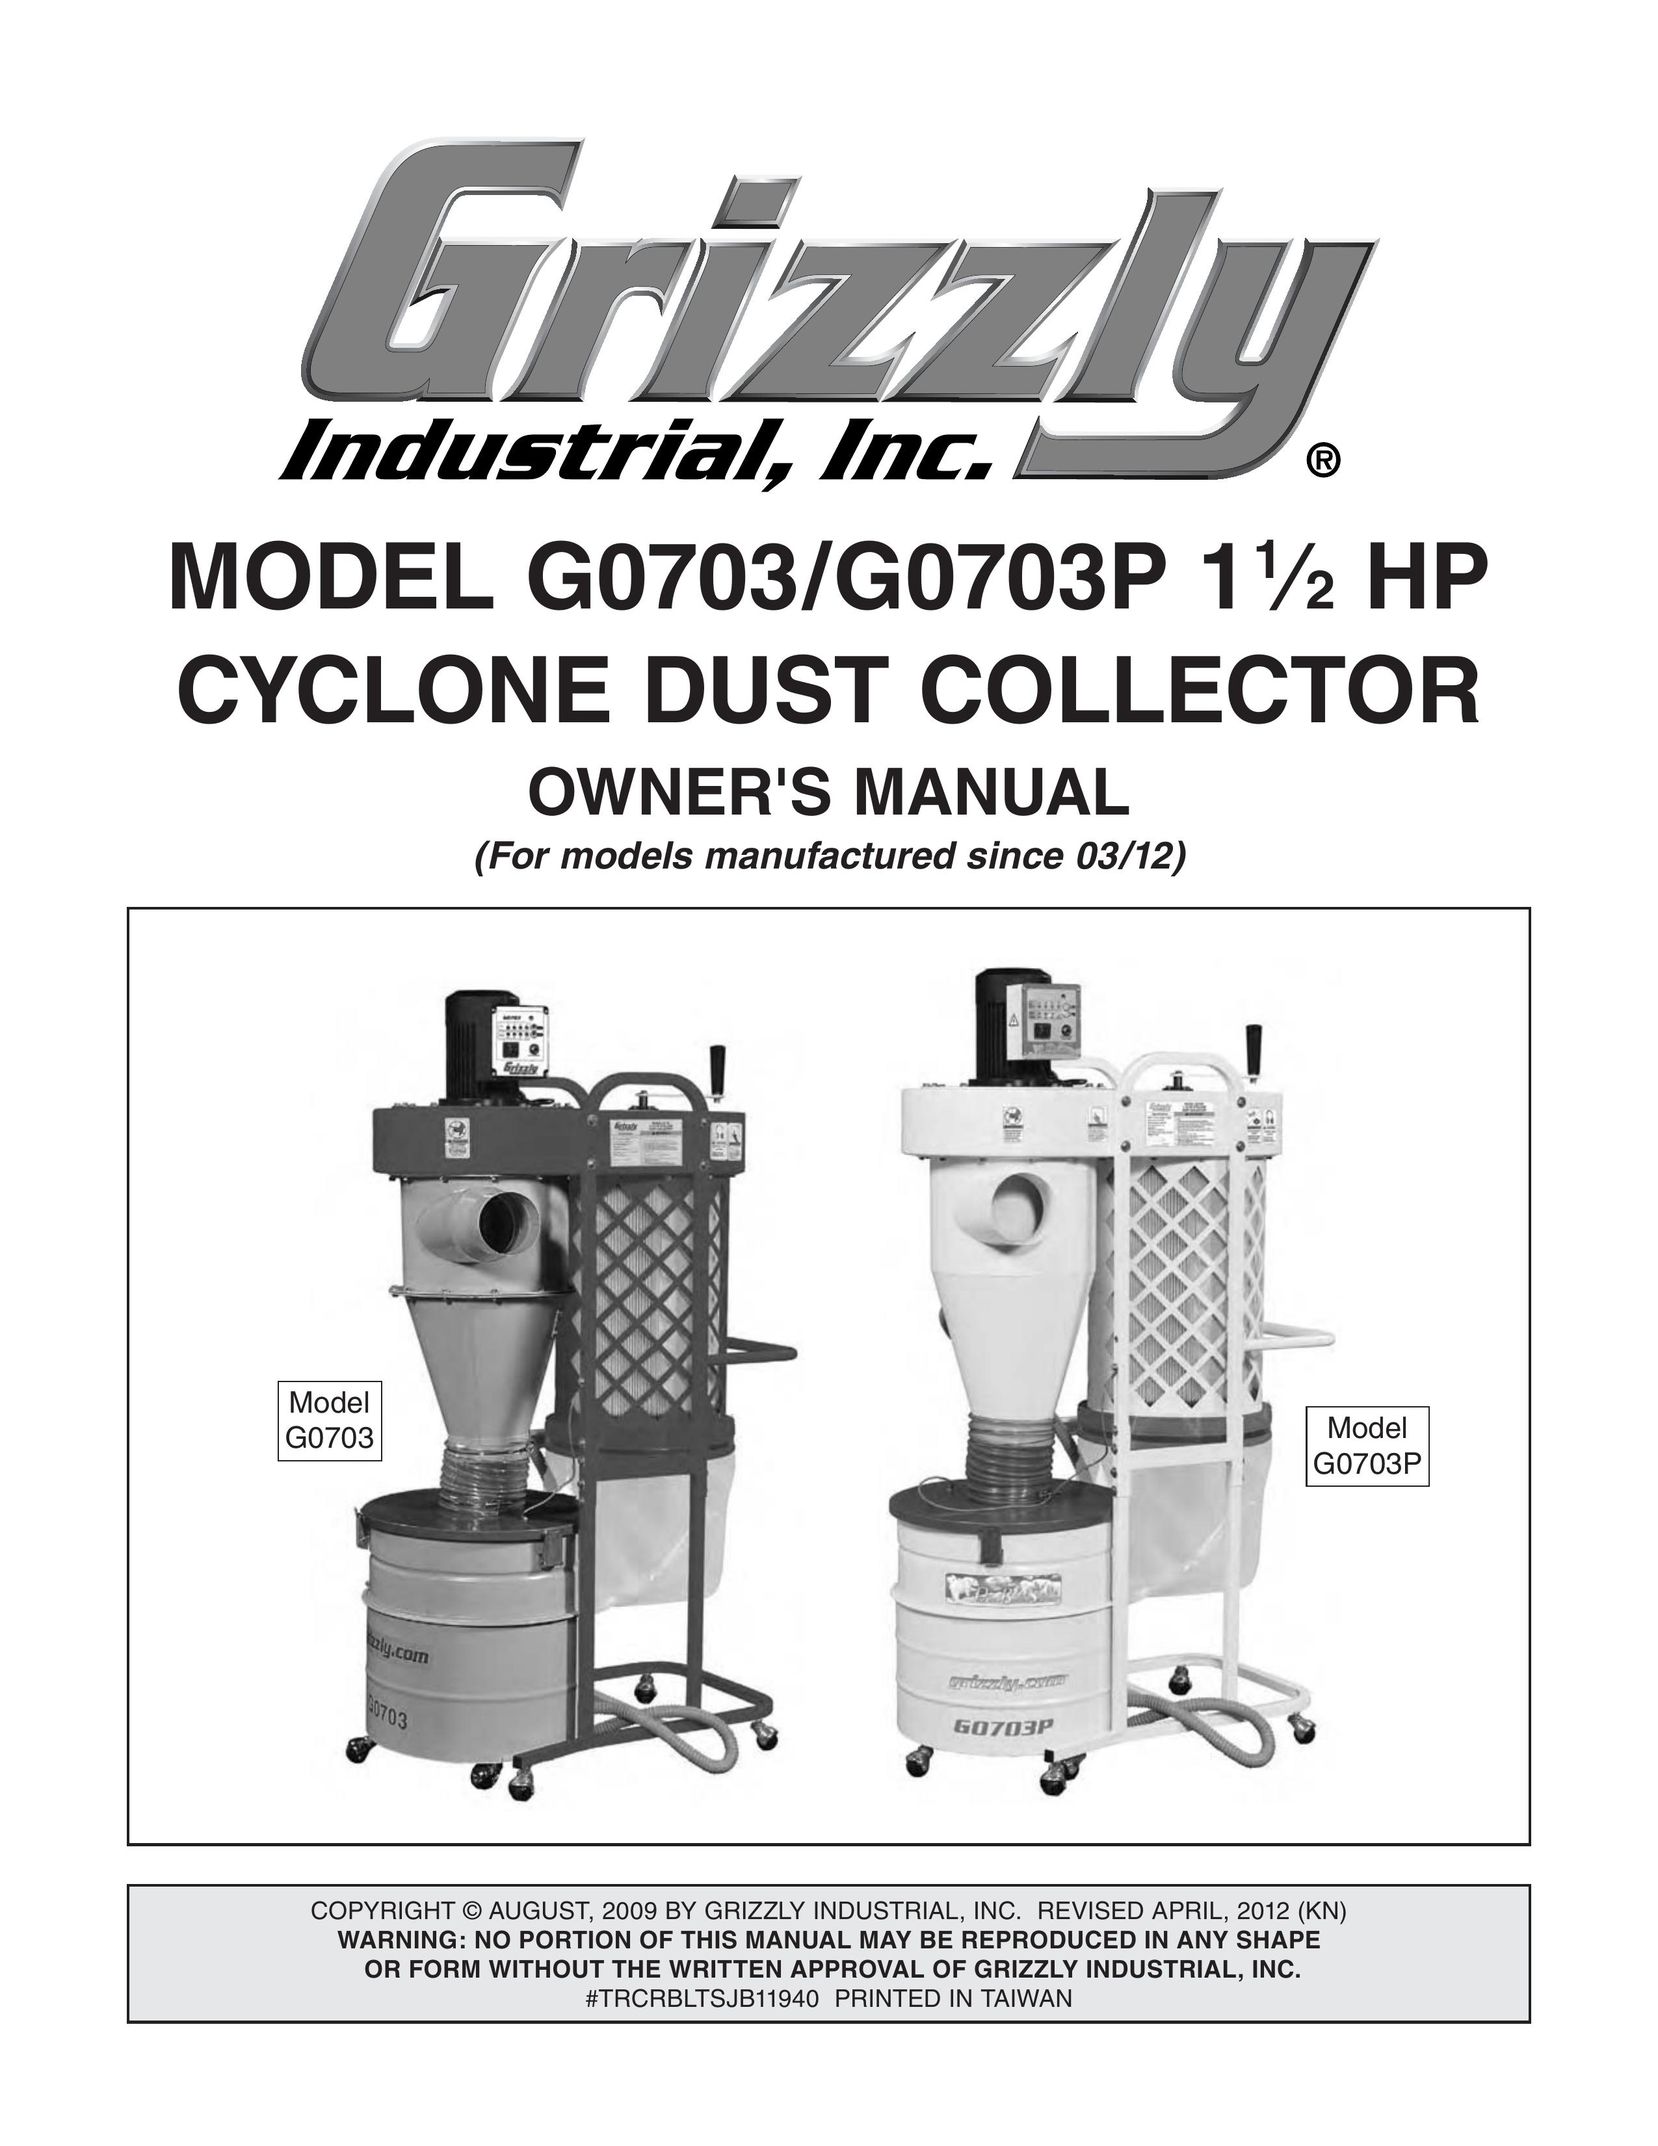 Grizzly G0703 Dust Collector User Manual